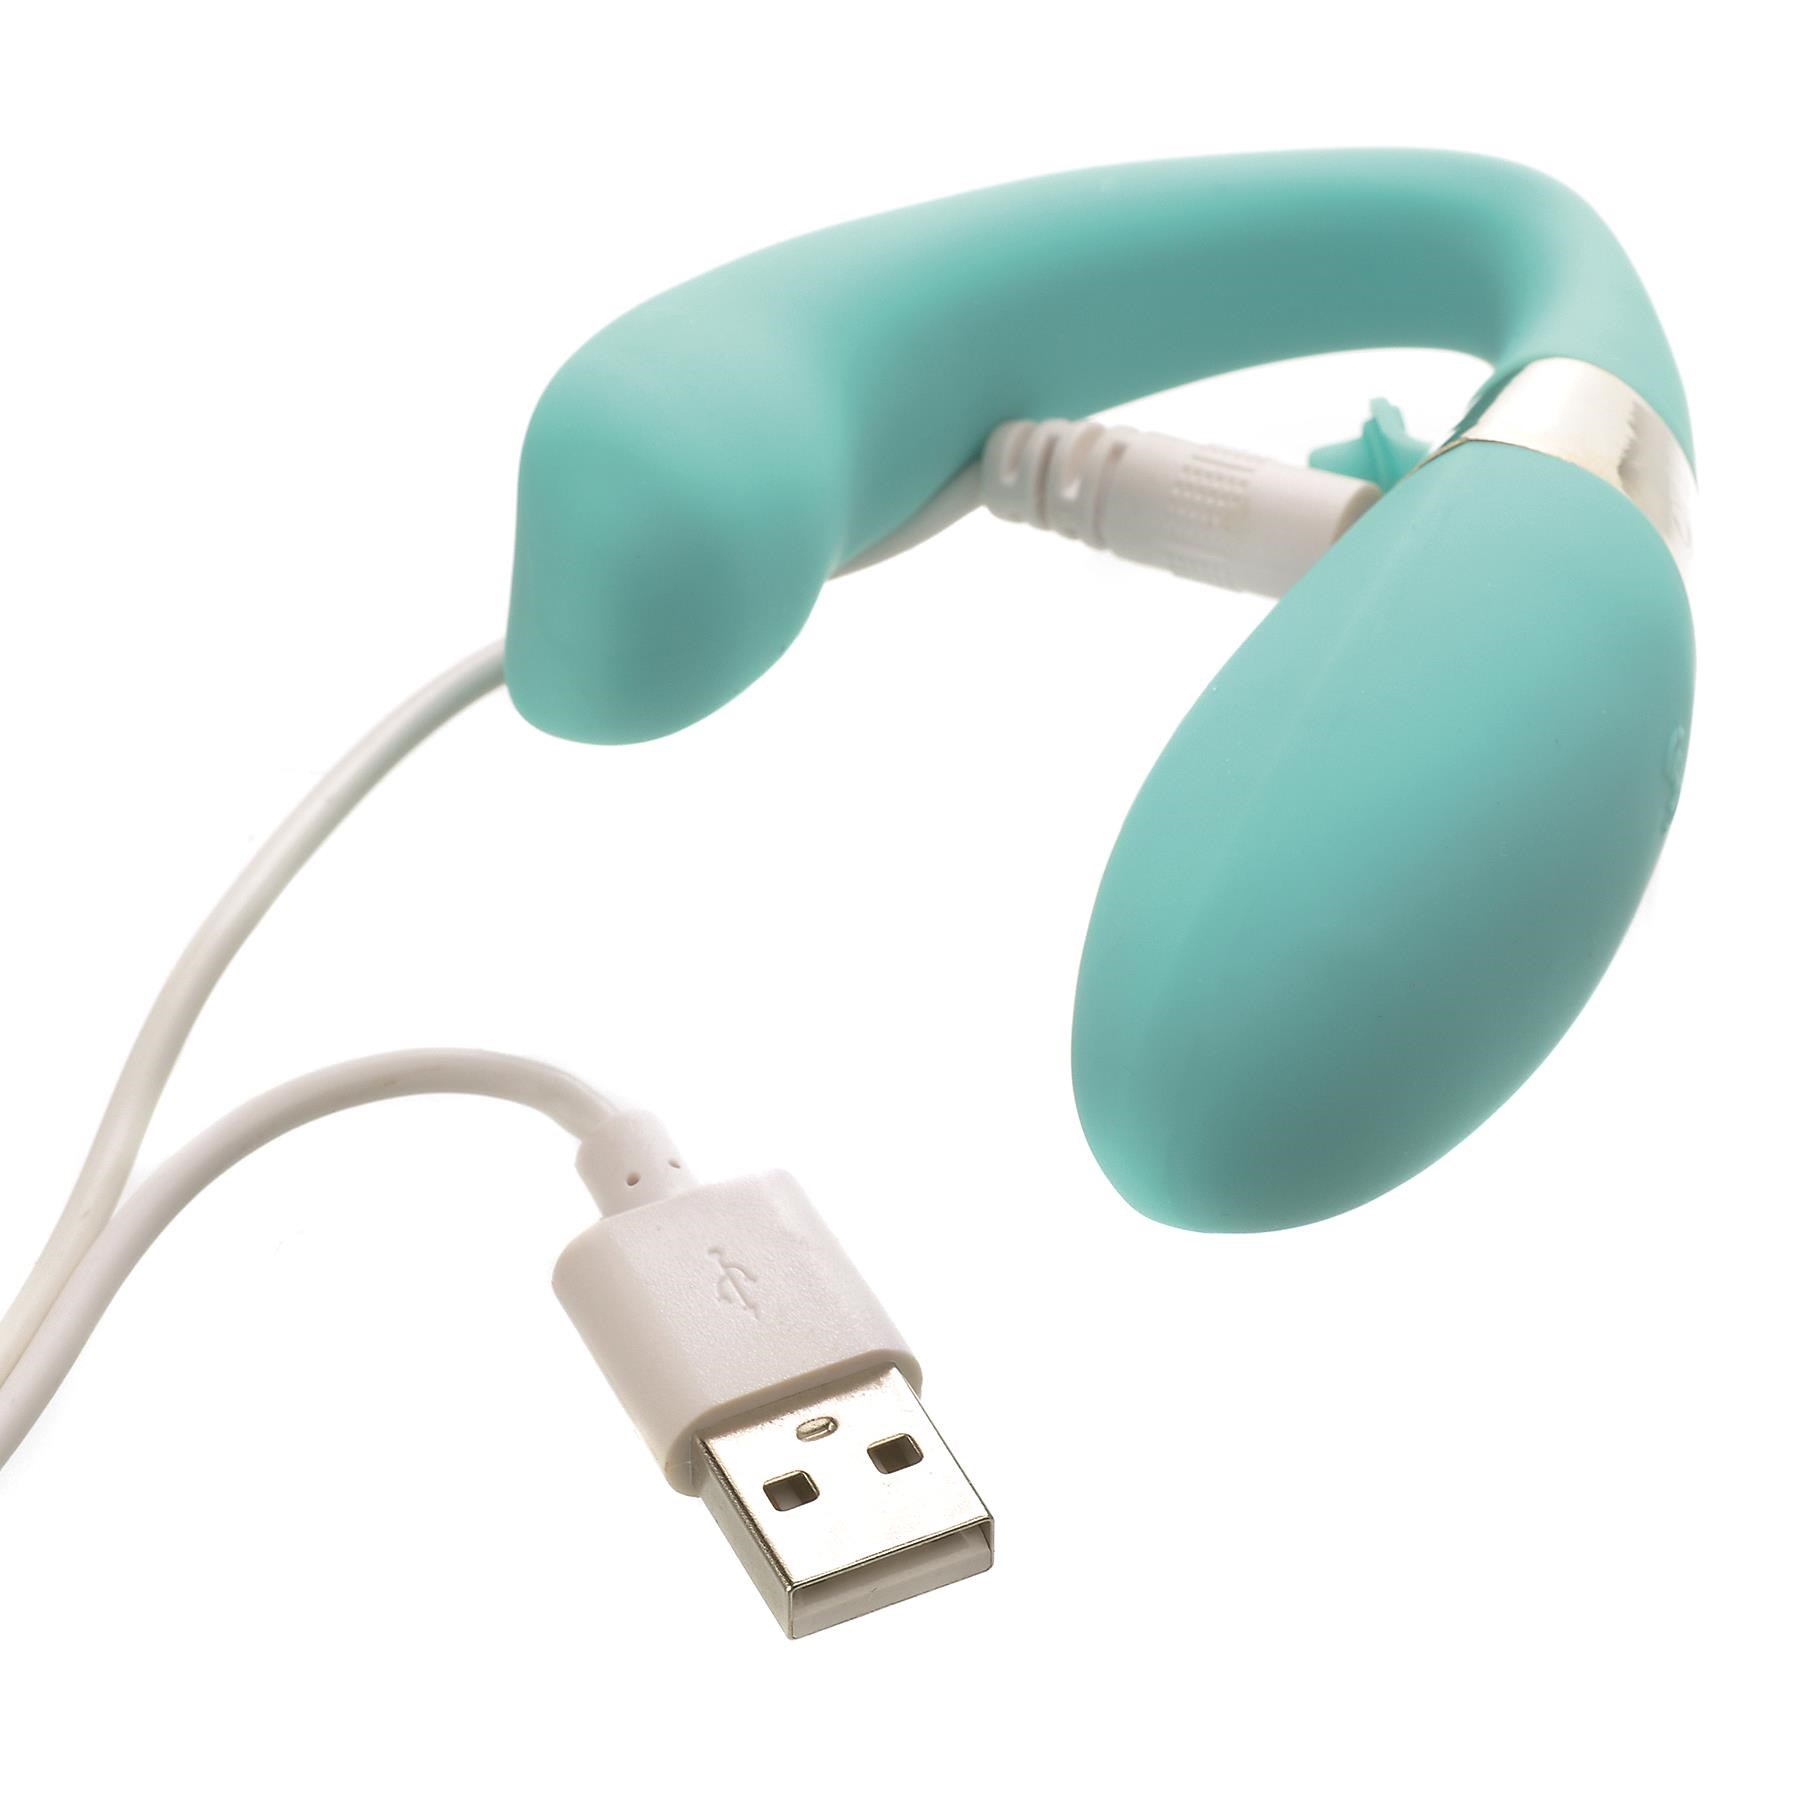 Lelo Tiani Harmony Couples Massager - Showing Where Charging Cable is Placed